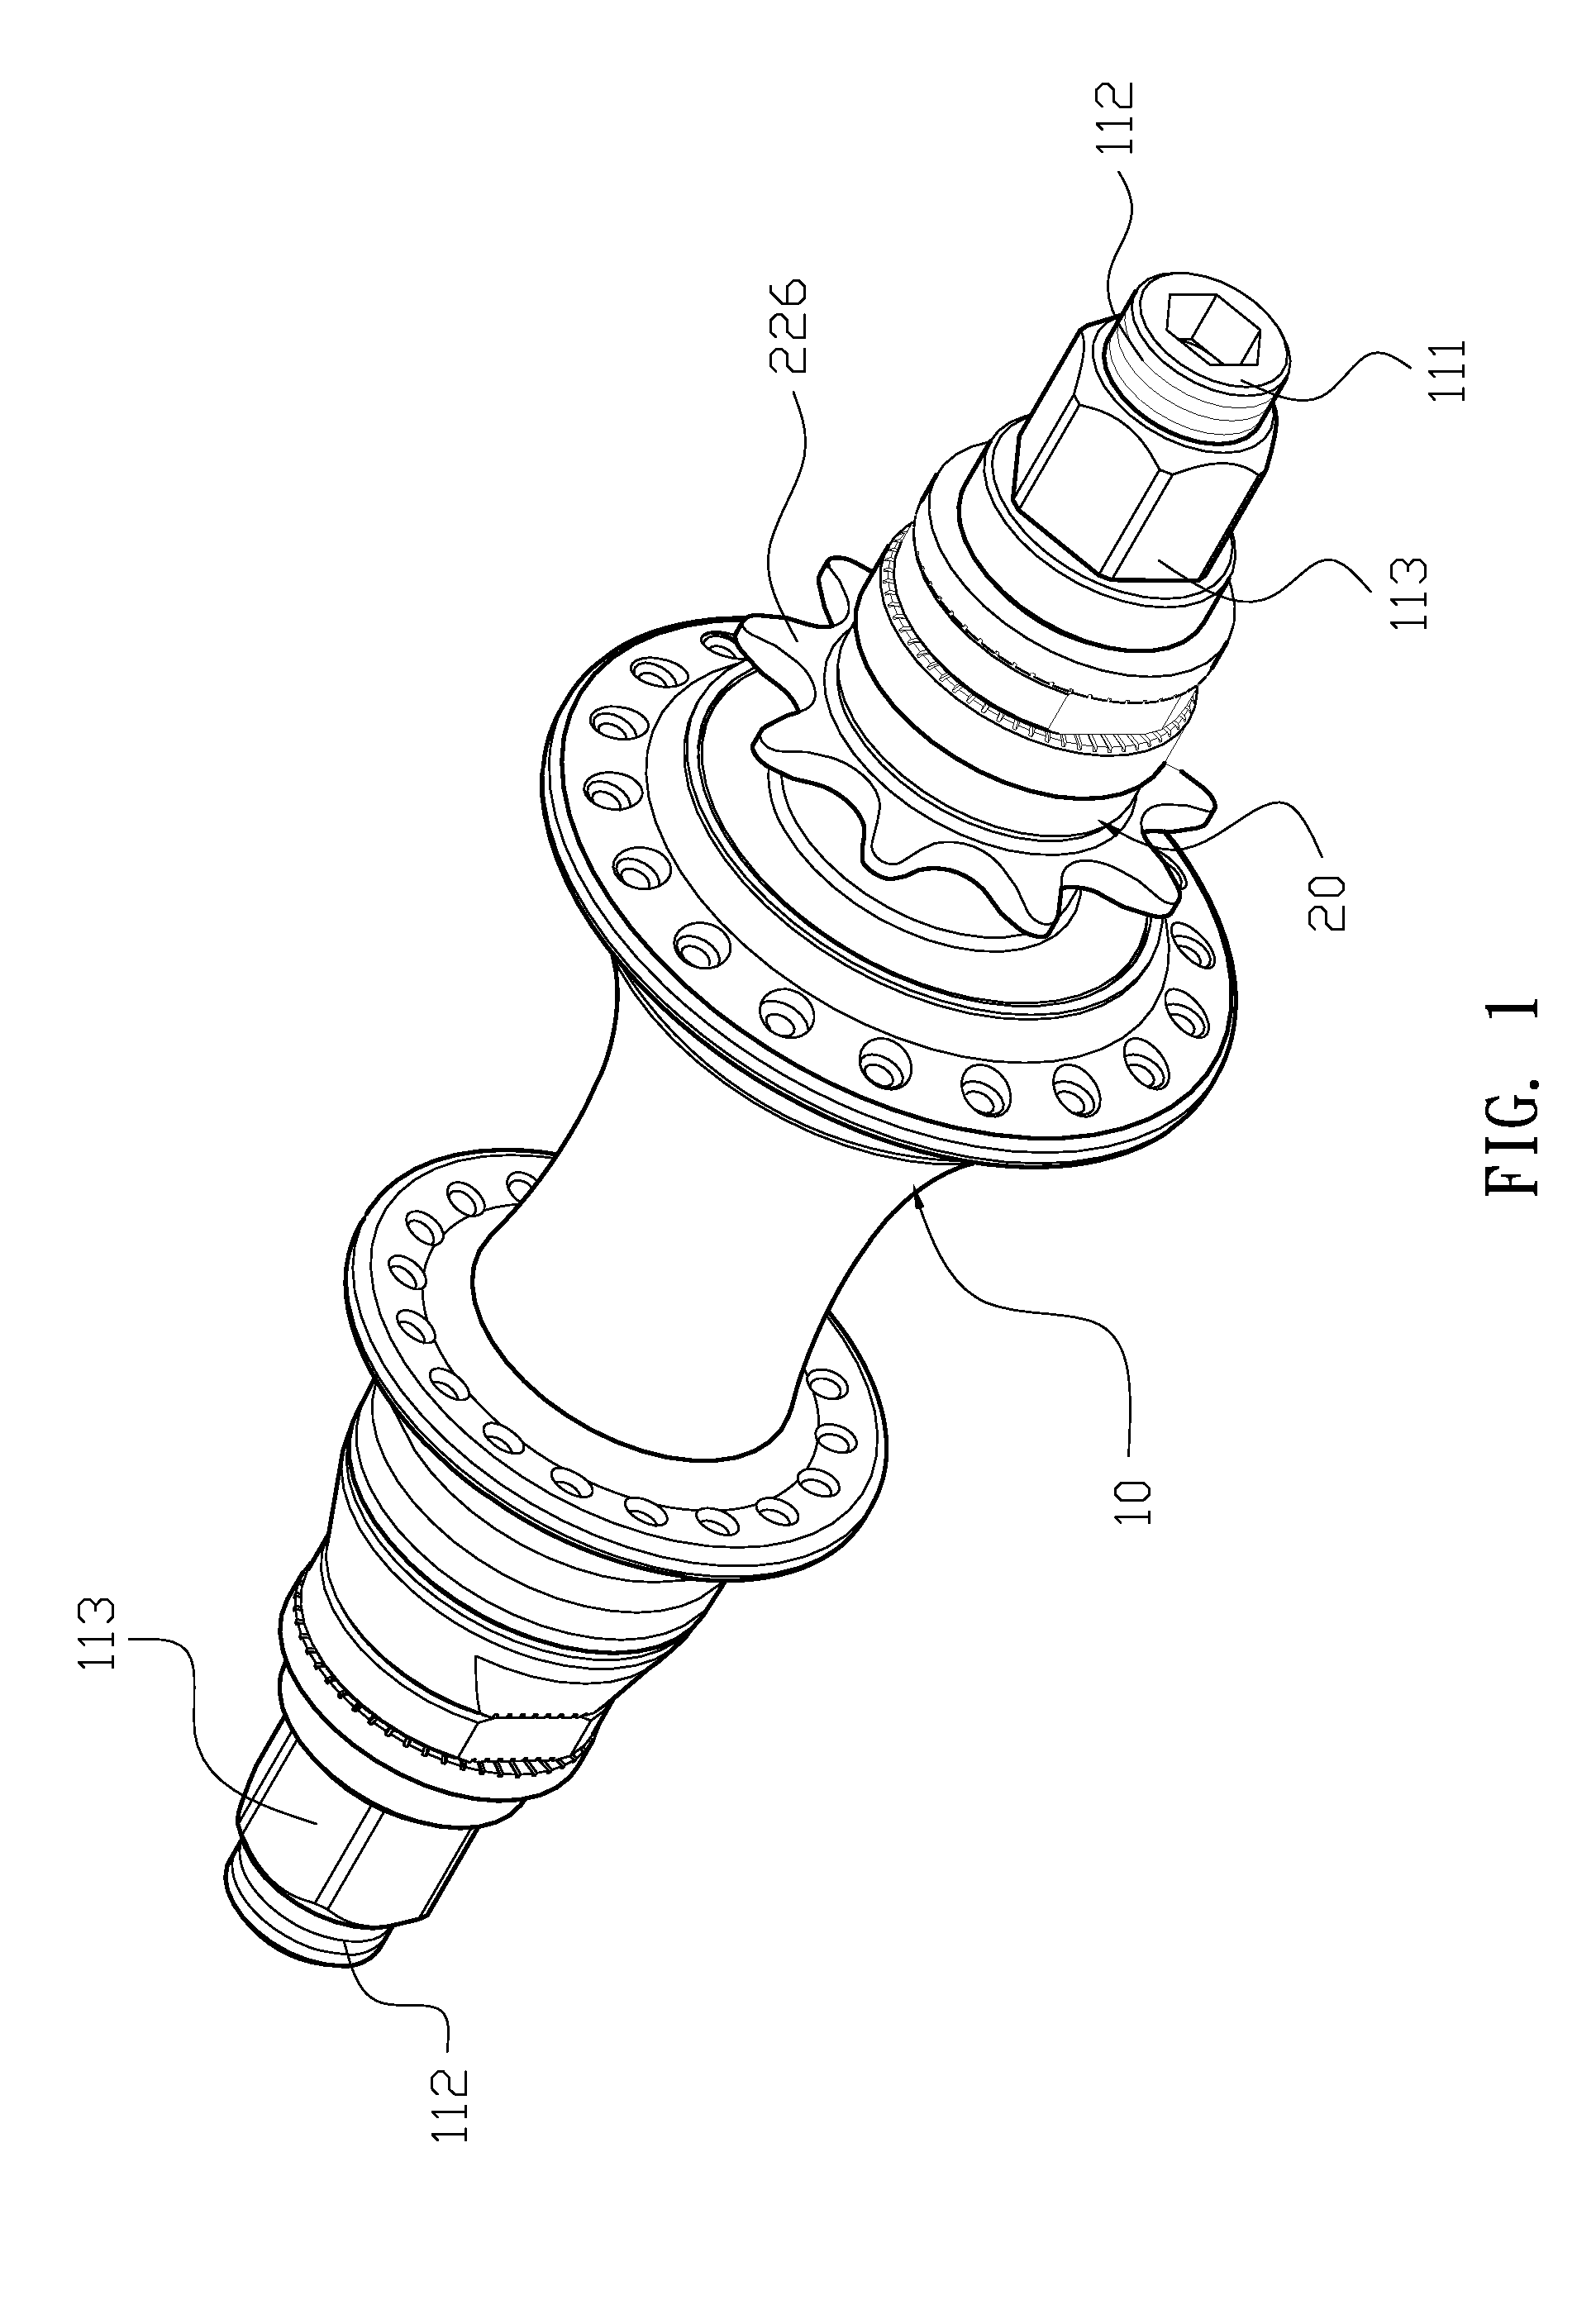 Driving apparatus for rear hub of bicycle